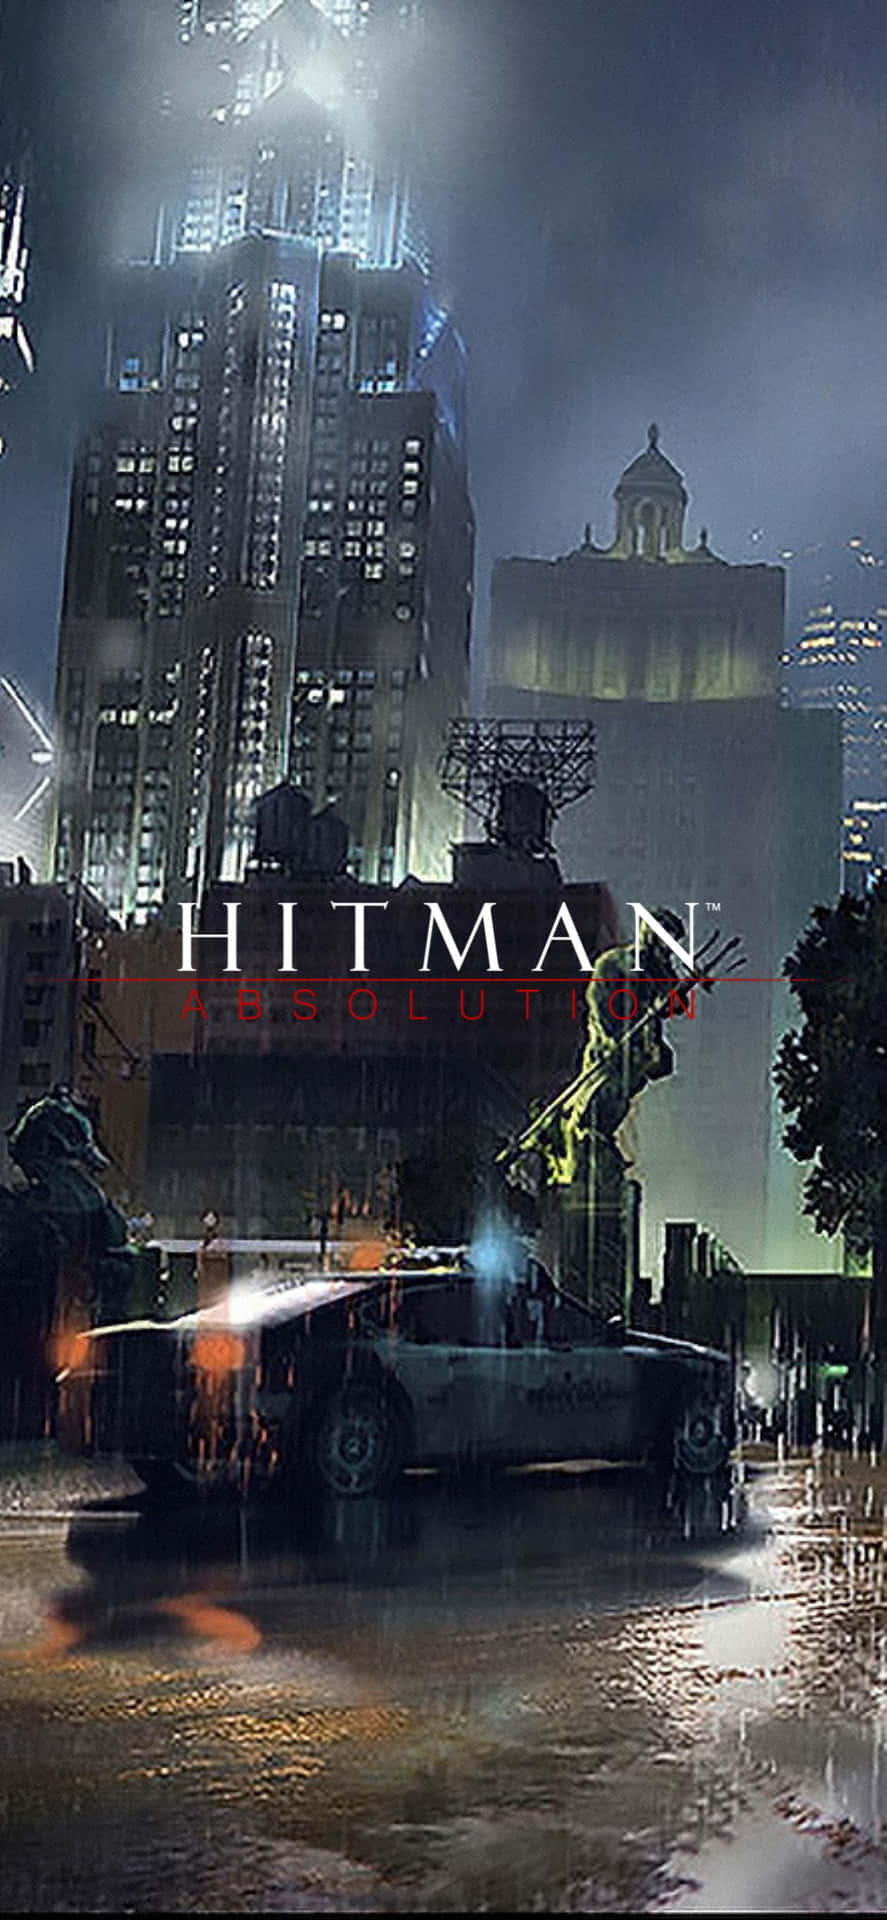 Hitman Absolution: The Thriller Game with The Bold iPhone X Look